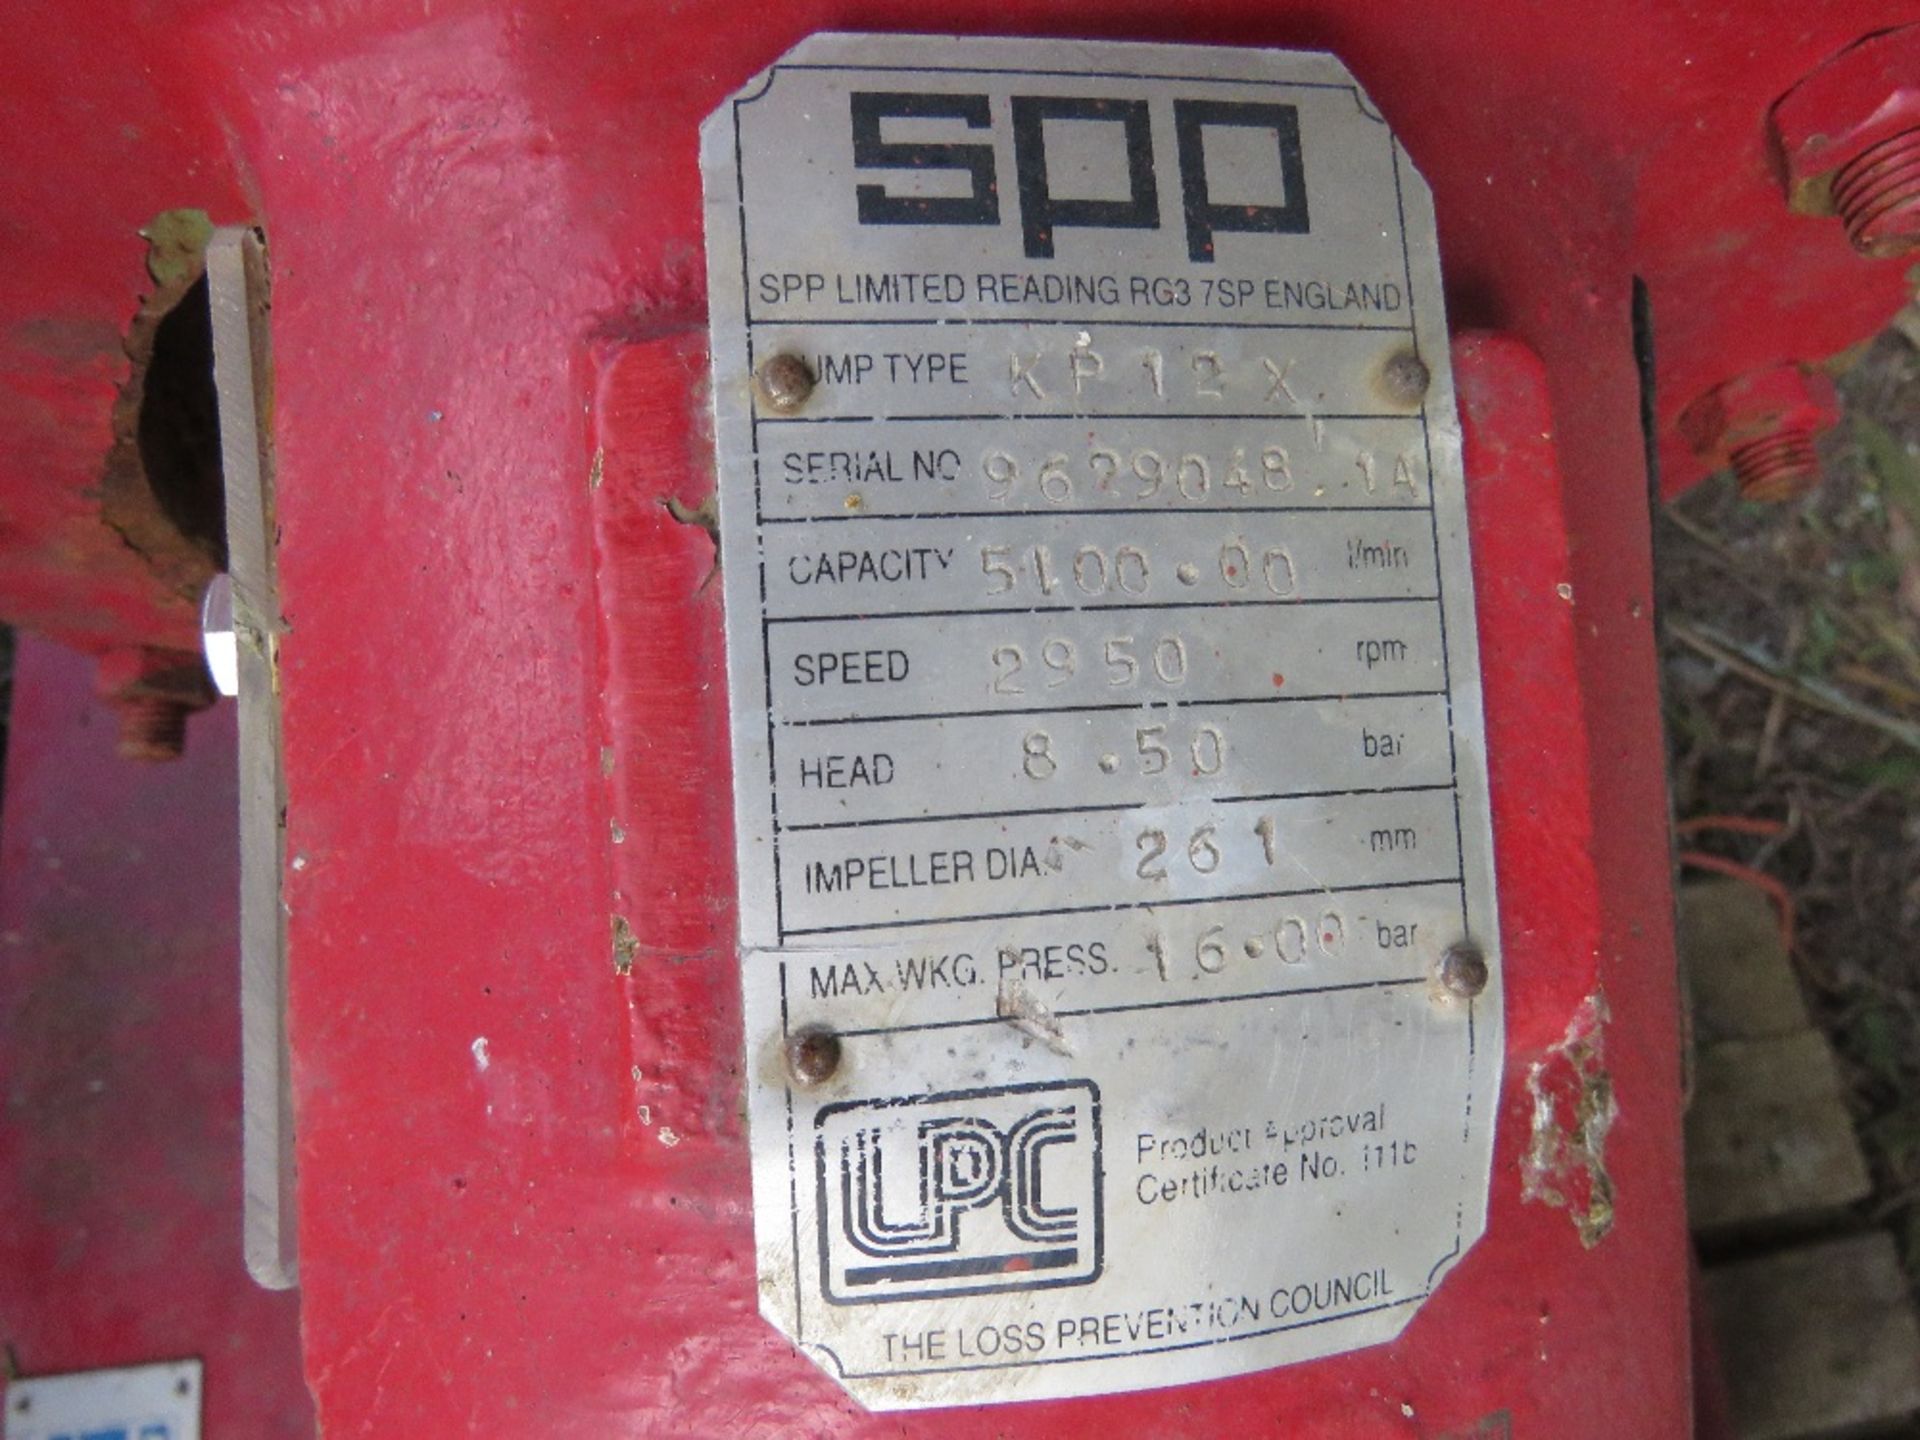 STERLING 3 PHASE POWERED FIRE PUMP. POWERED BY BROOK HANSEN 132KW MOTOR.....THIS LOT IS SOLD UNDER T - Image 7 of 7